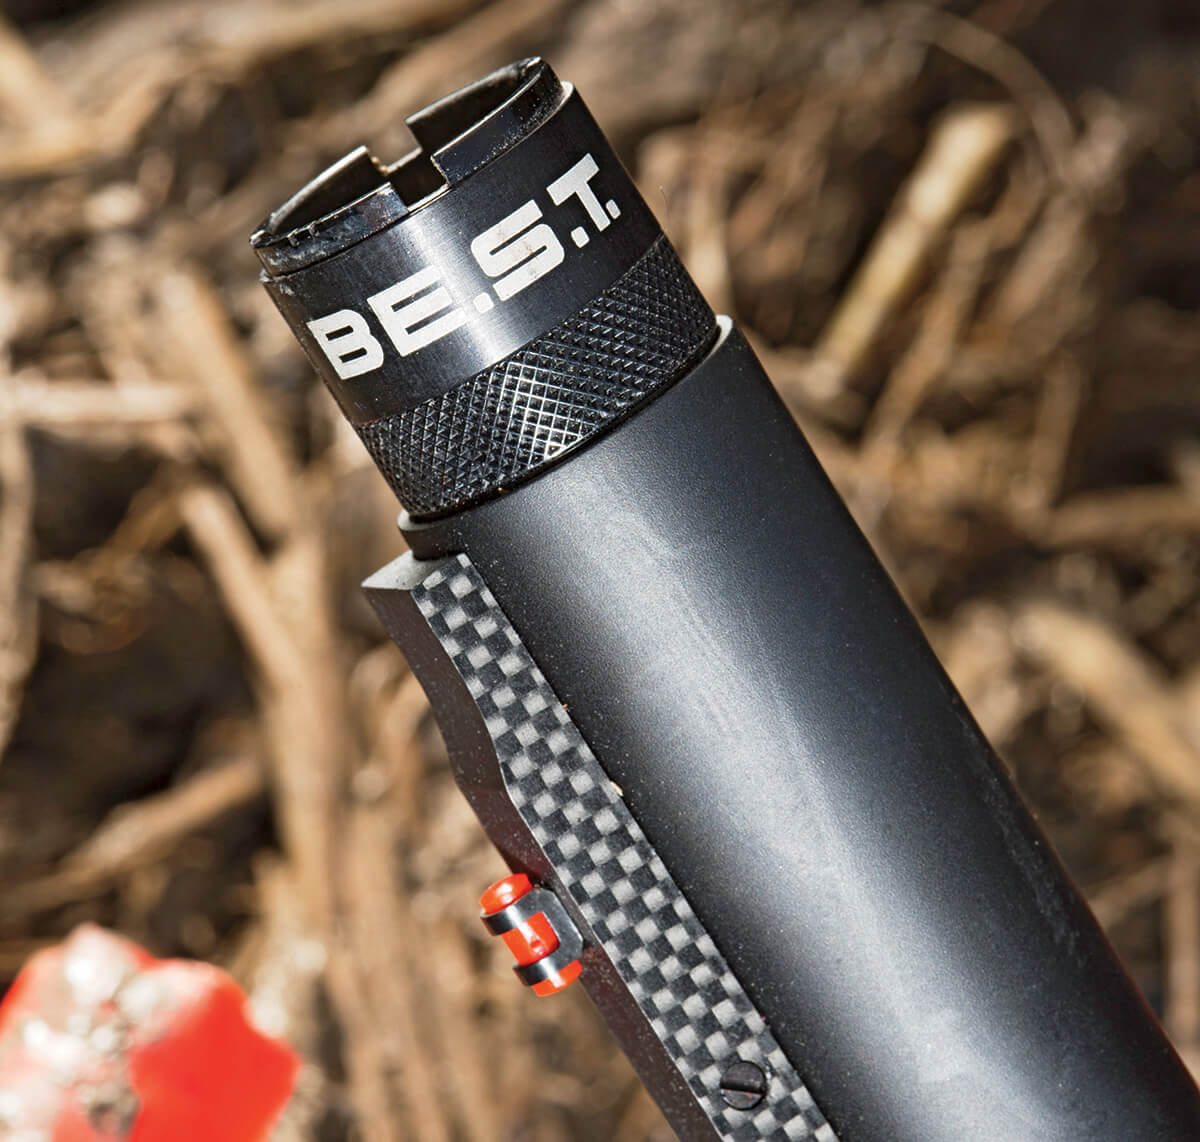 BE.S.T. (Benelli Surface Treatment) Rifle Coating: Tested Diamond-Like Carbon Particles